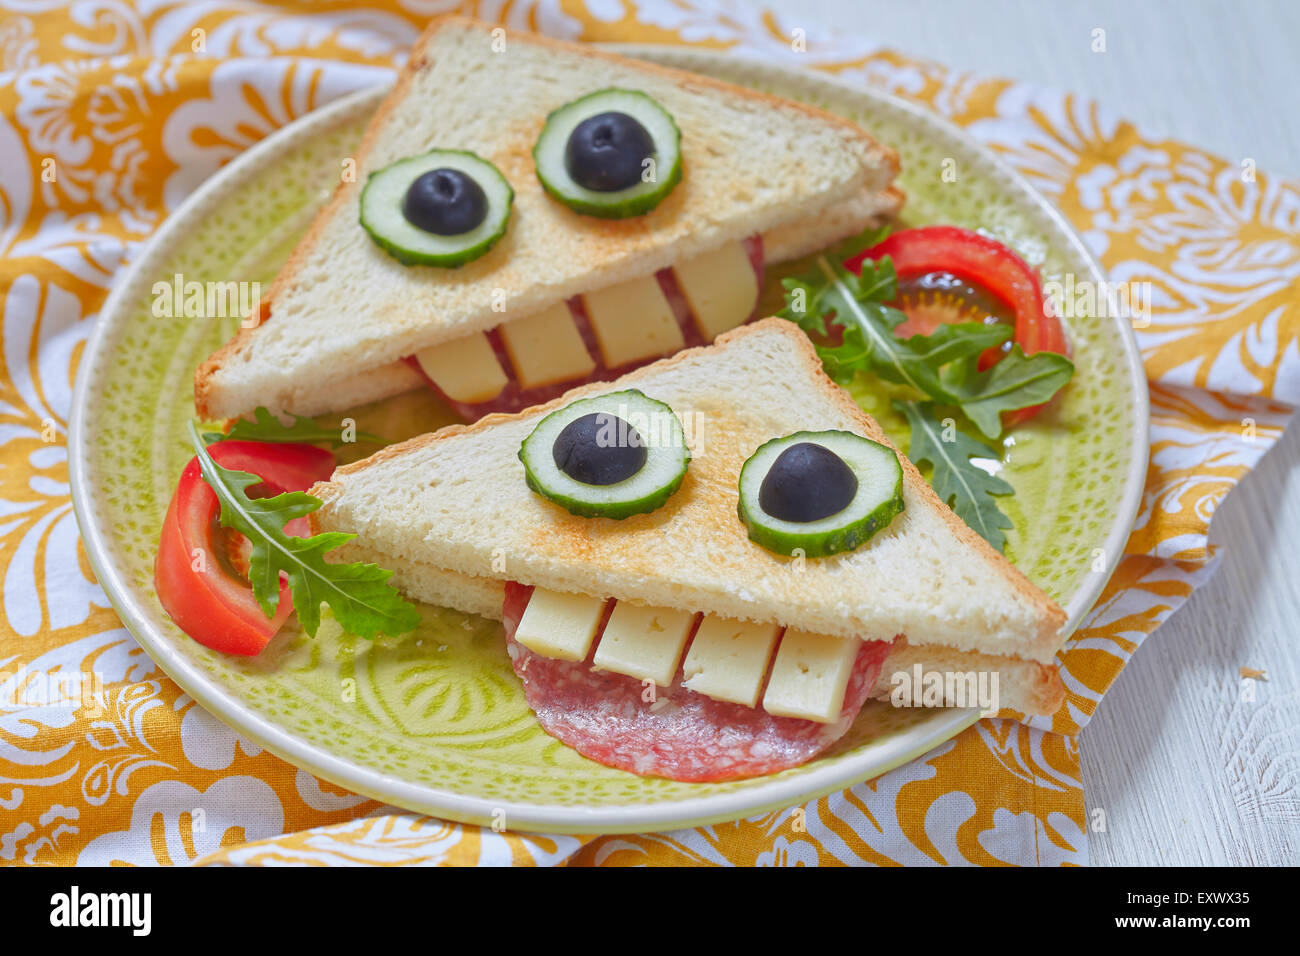 Funny sandwich for kids lunch on a table Stock Photo